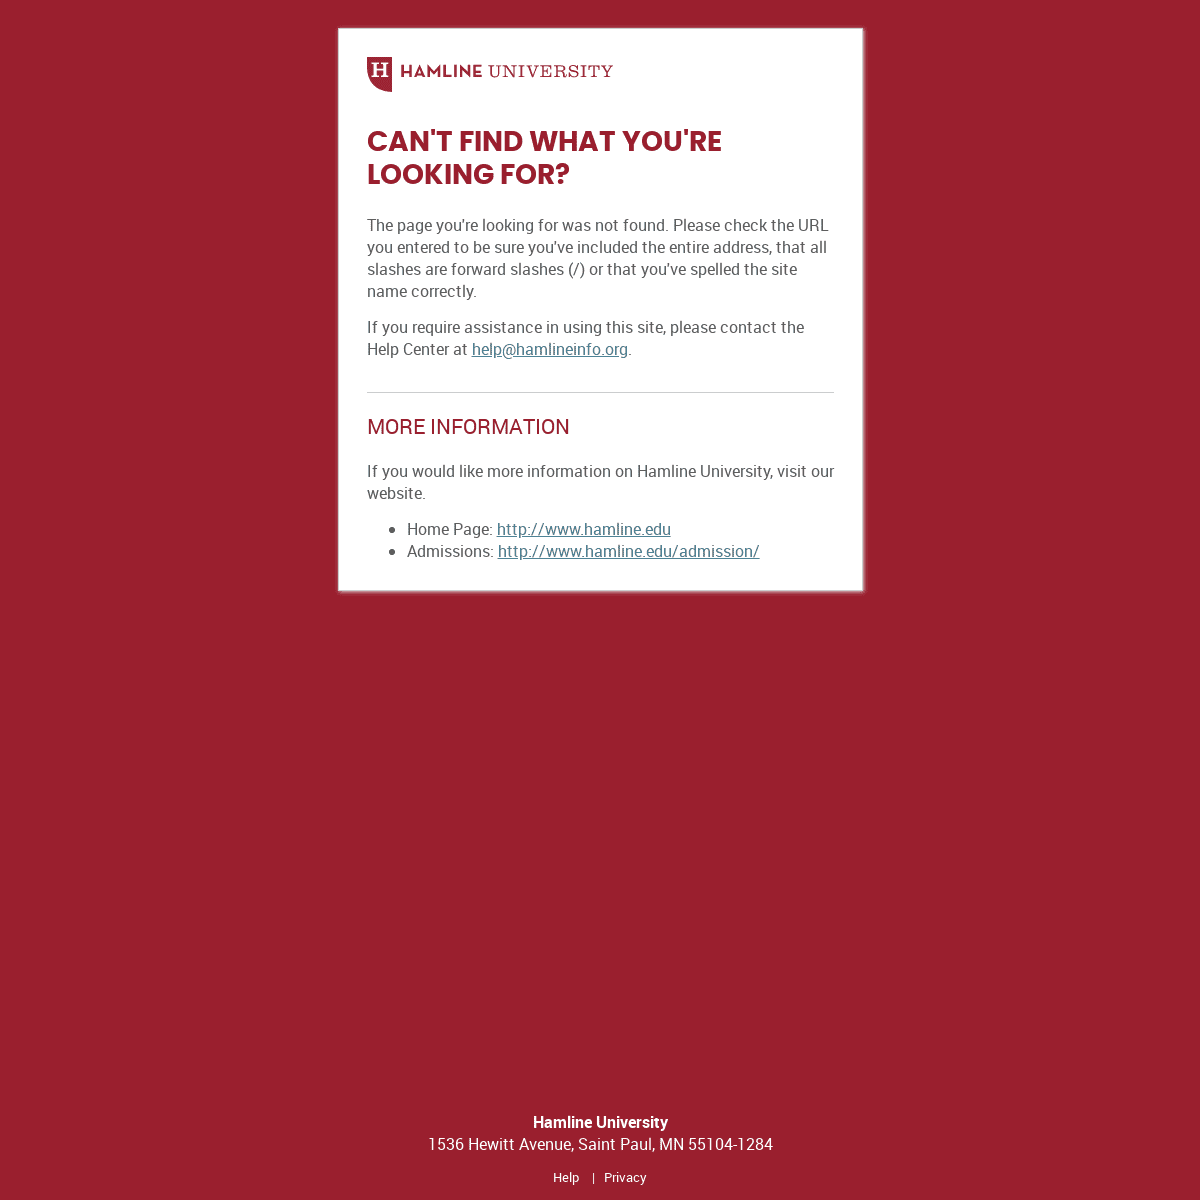 A complete backup of hamlineinfo.org